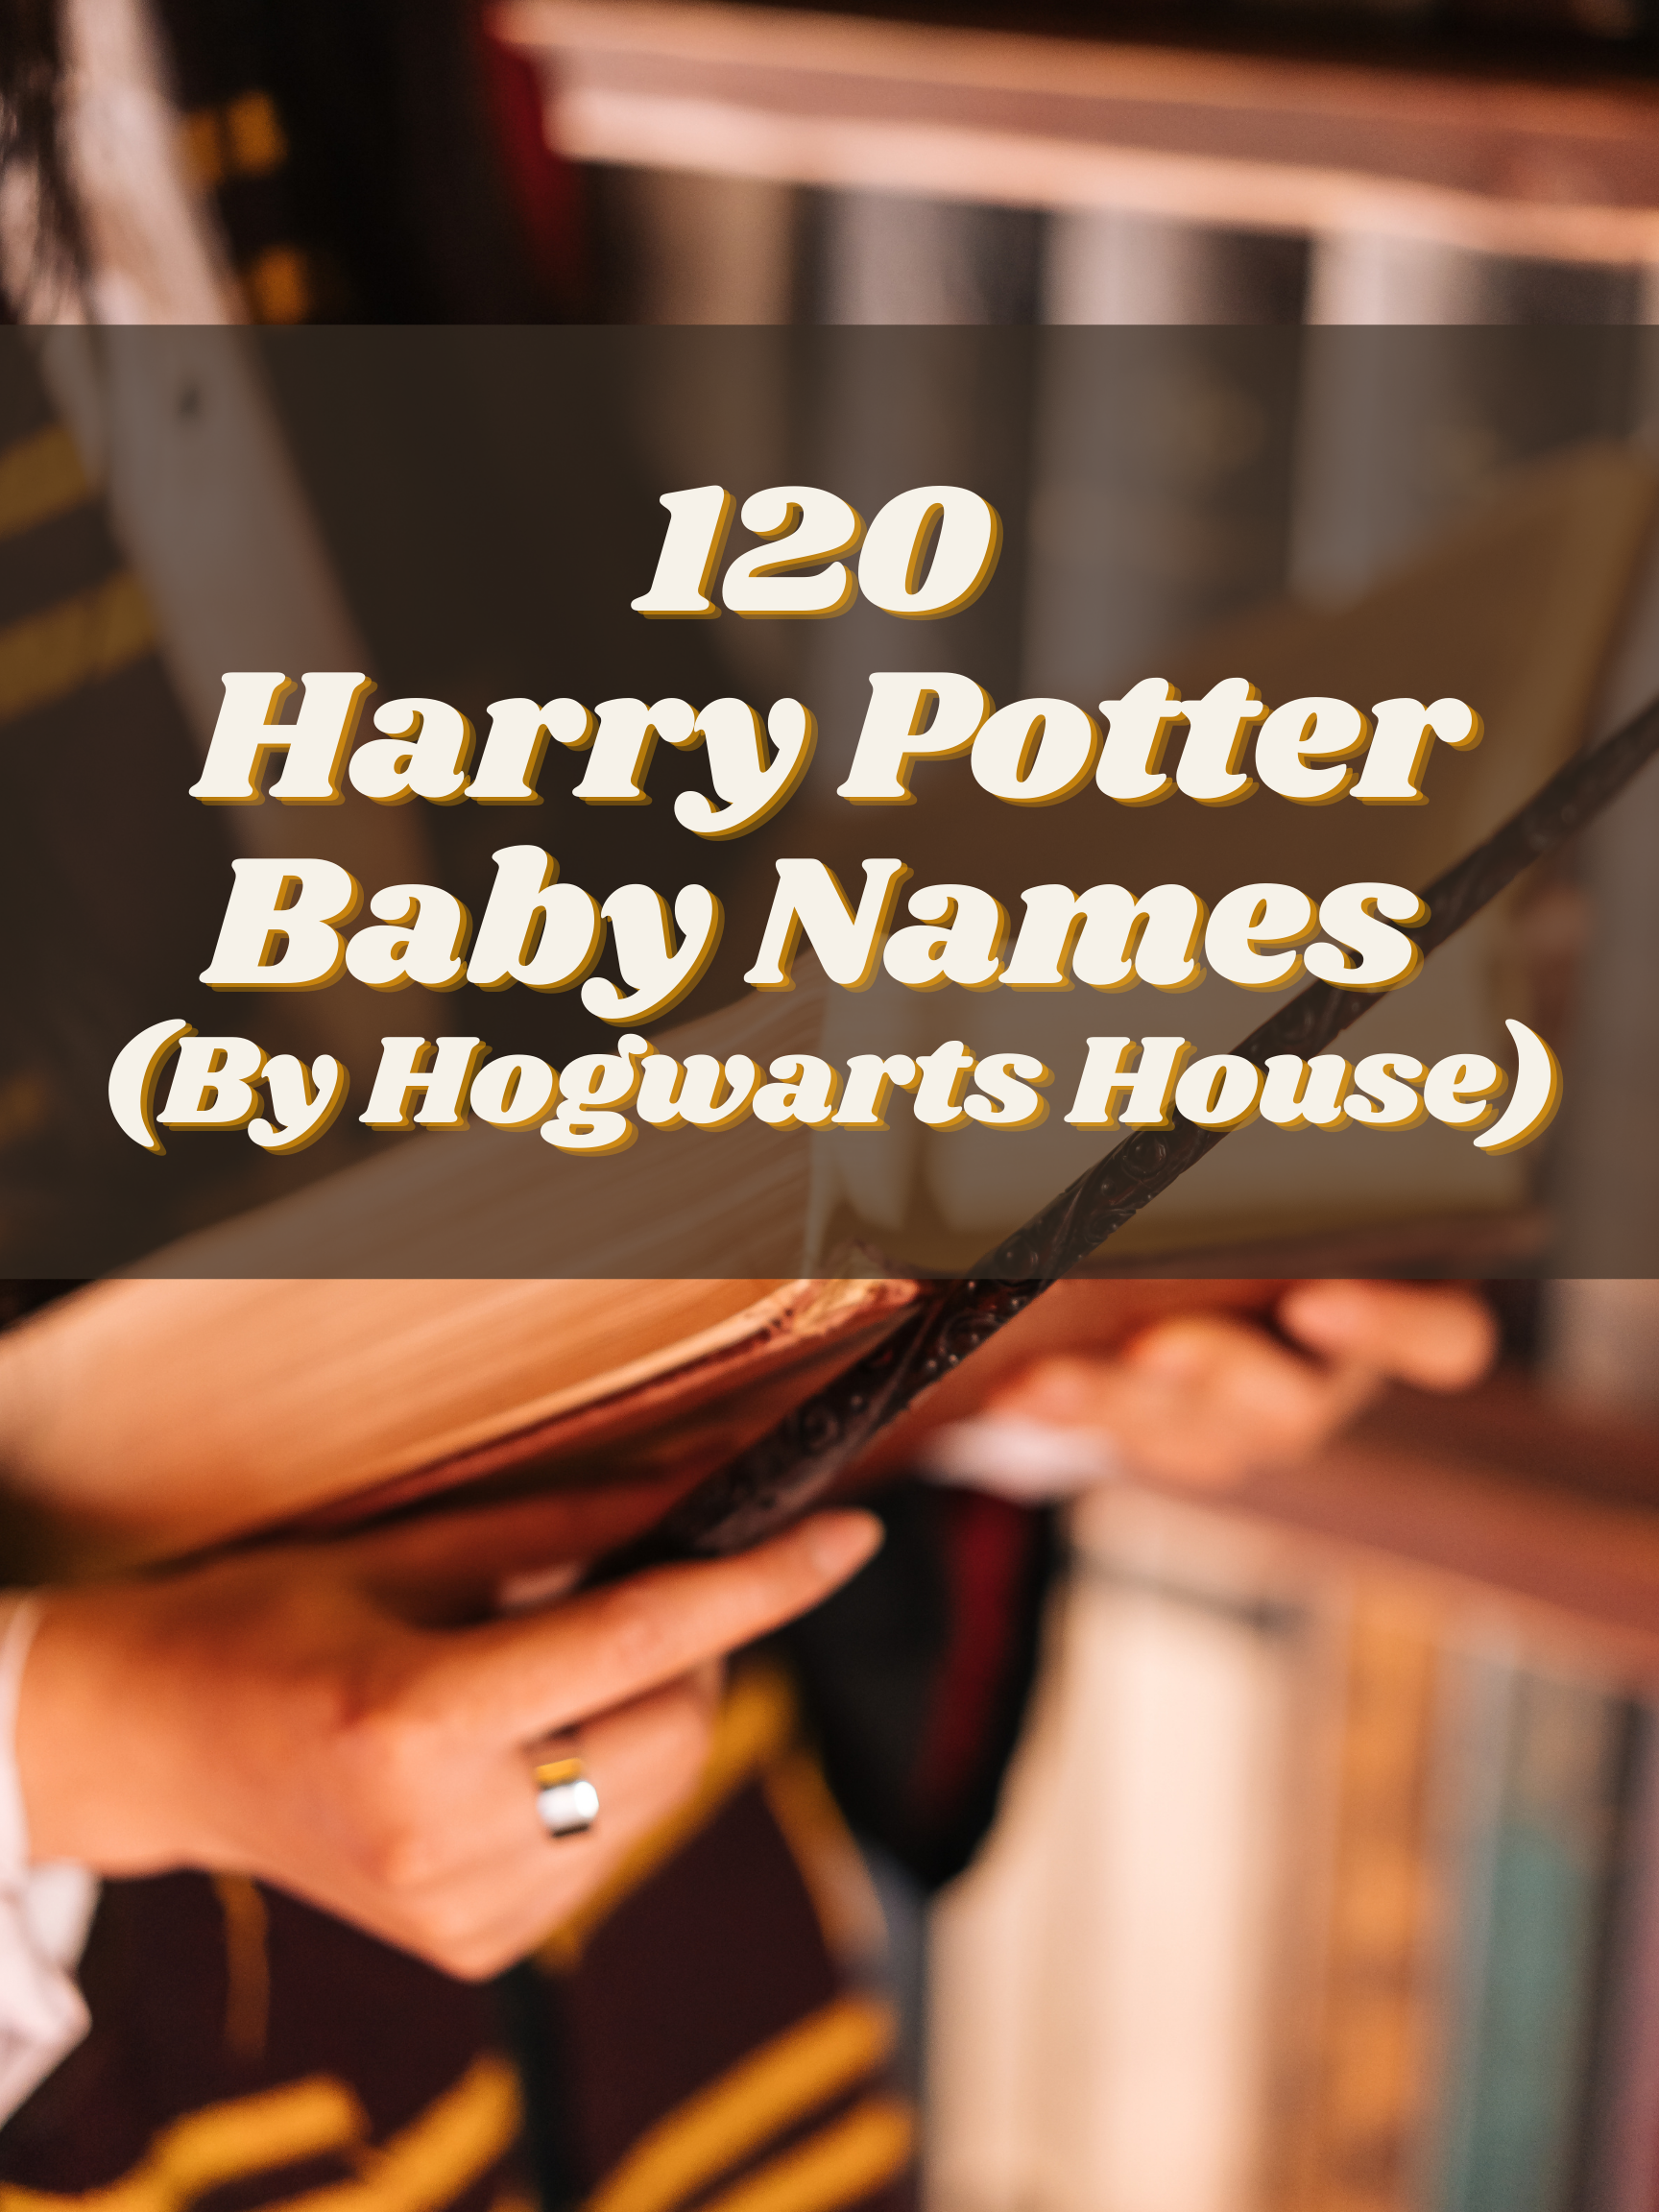 120 Harry Potter Baby Names (By Hogwarts House)